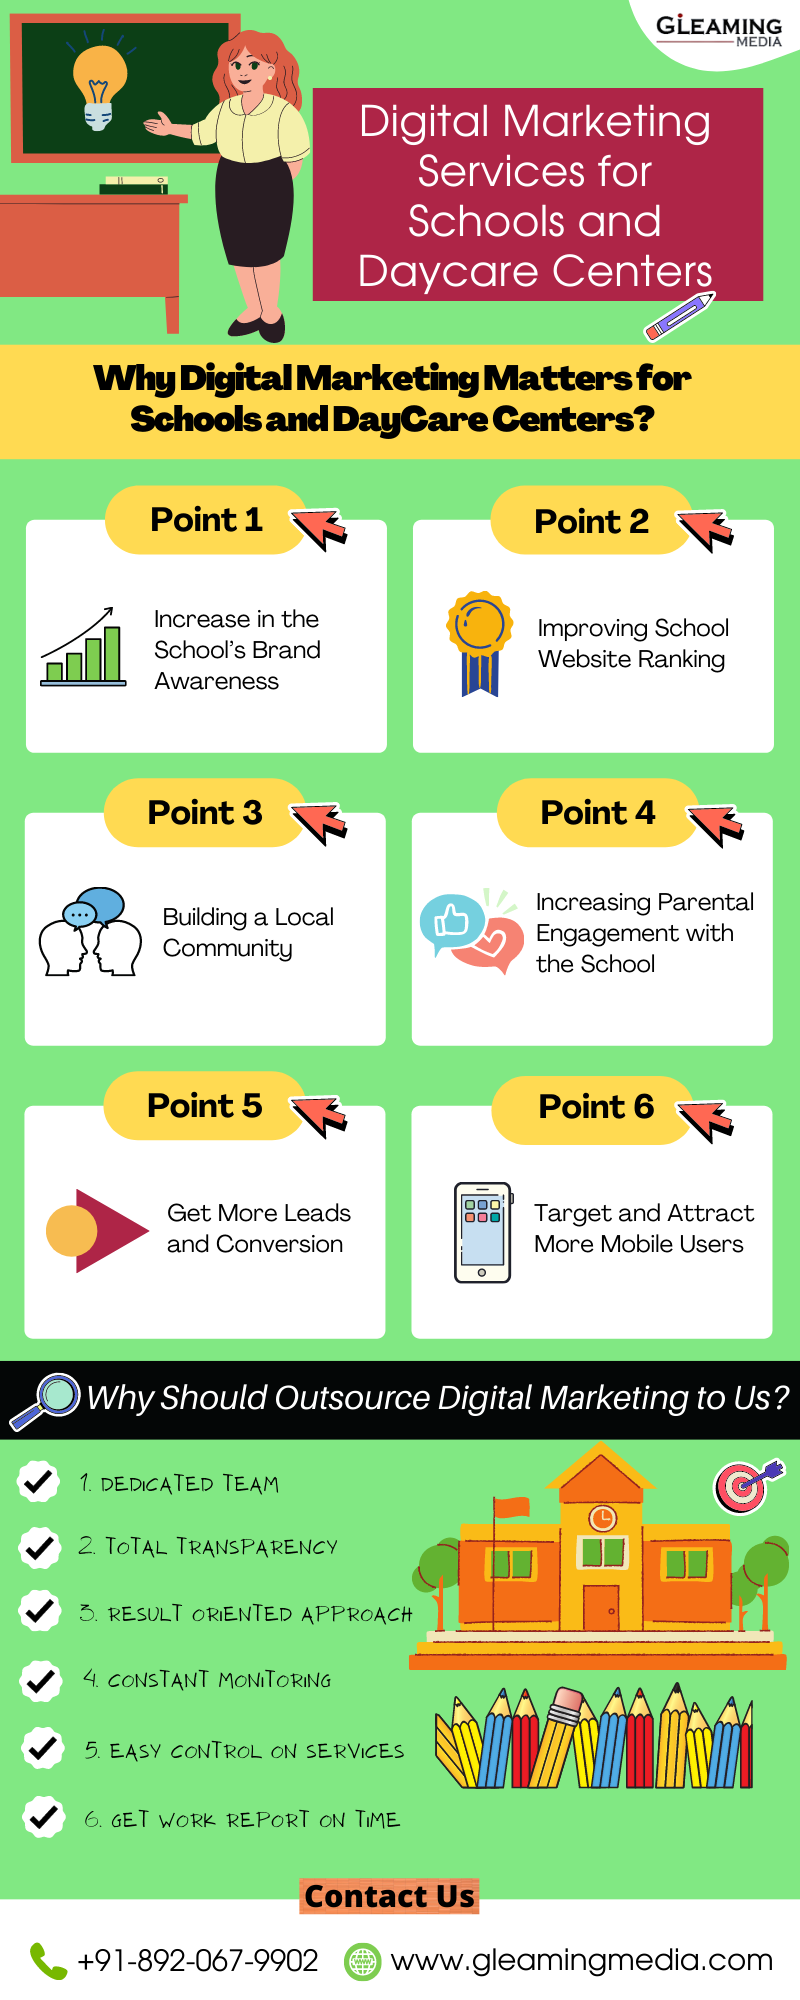 Digital Marketing for School and Daycare